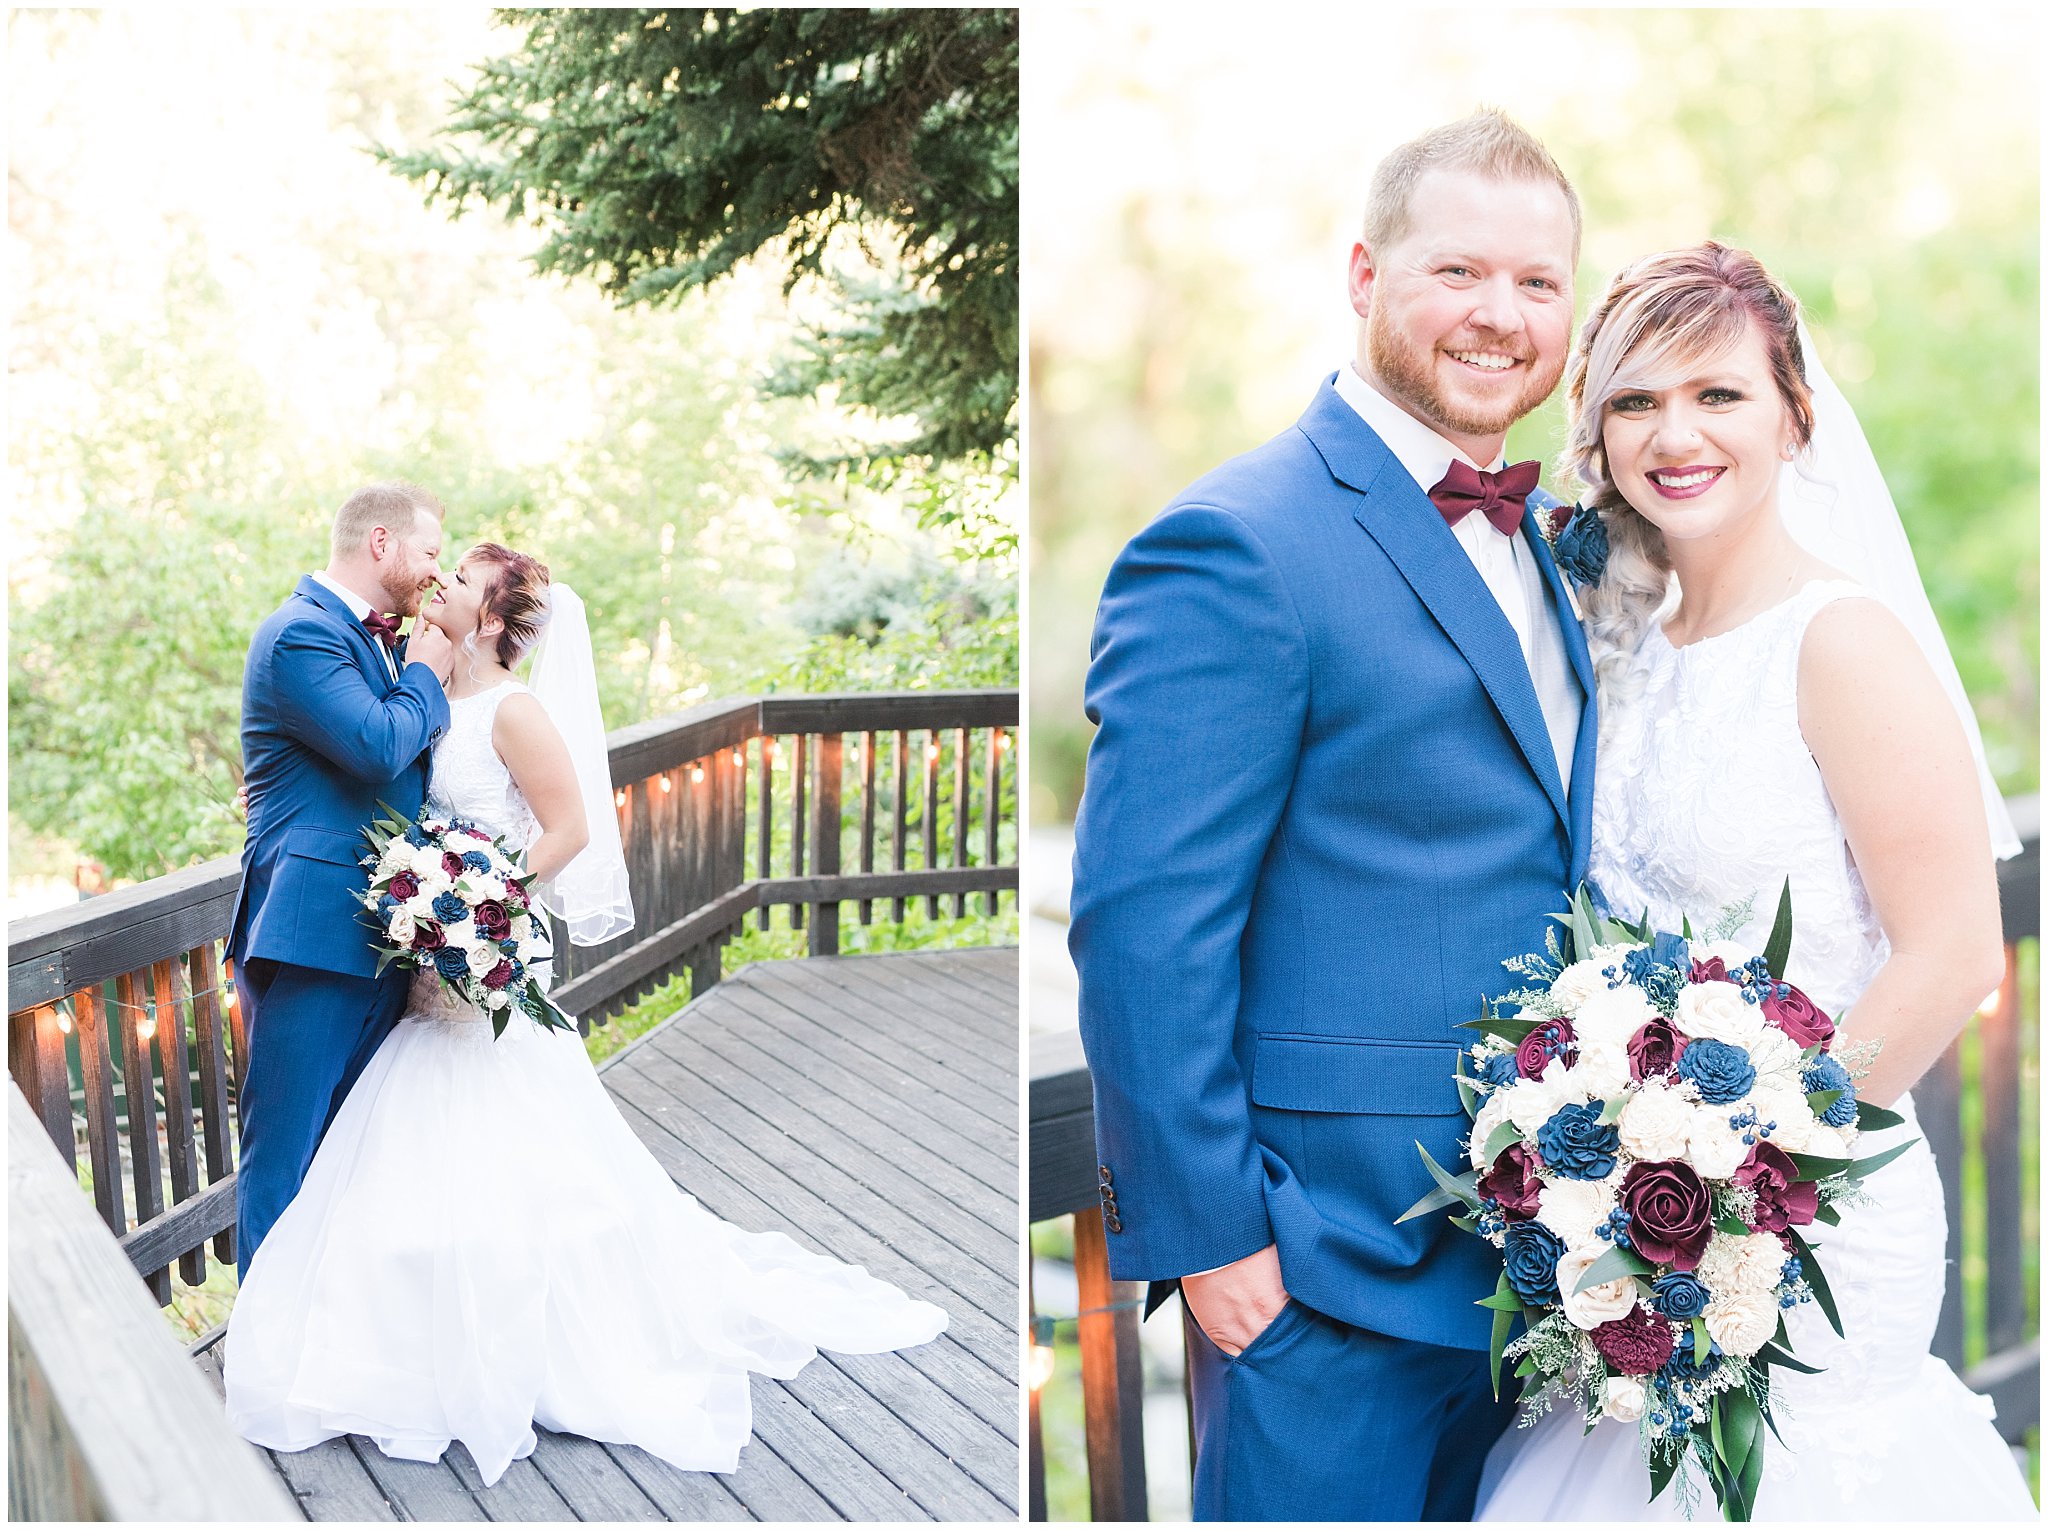 Bride in lace mermaid dress and wooden bouquet, groom in Cornish blue suit and burgundy bow tie portraits on wedding day | Log Haven Summer Mountain Wedding | Jessie and Dallin Photography